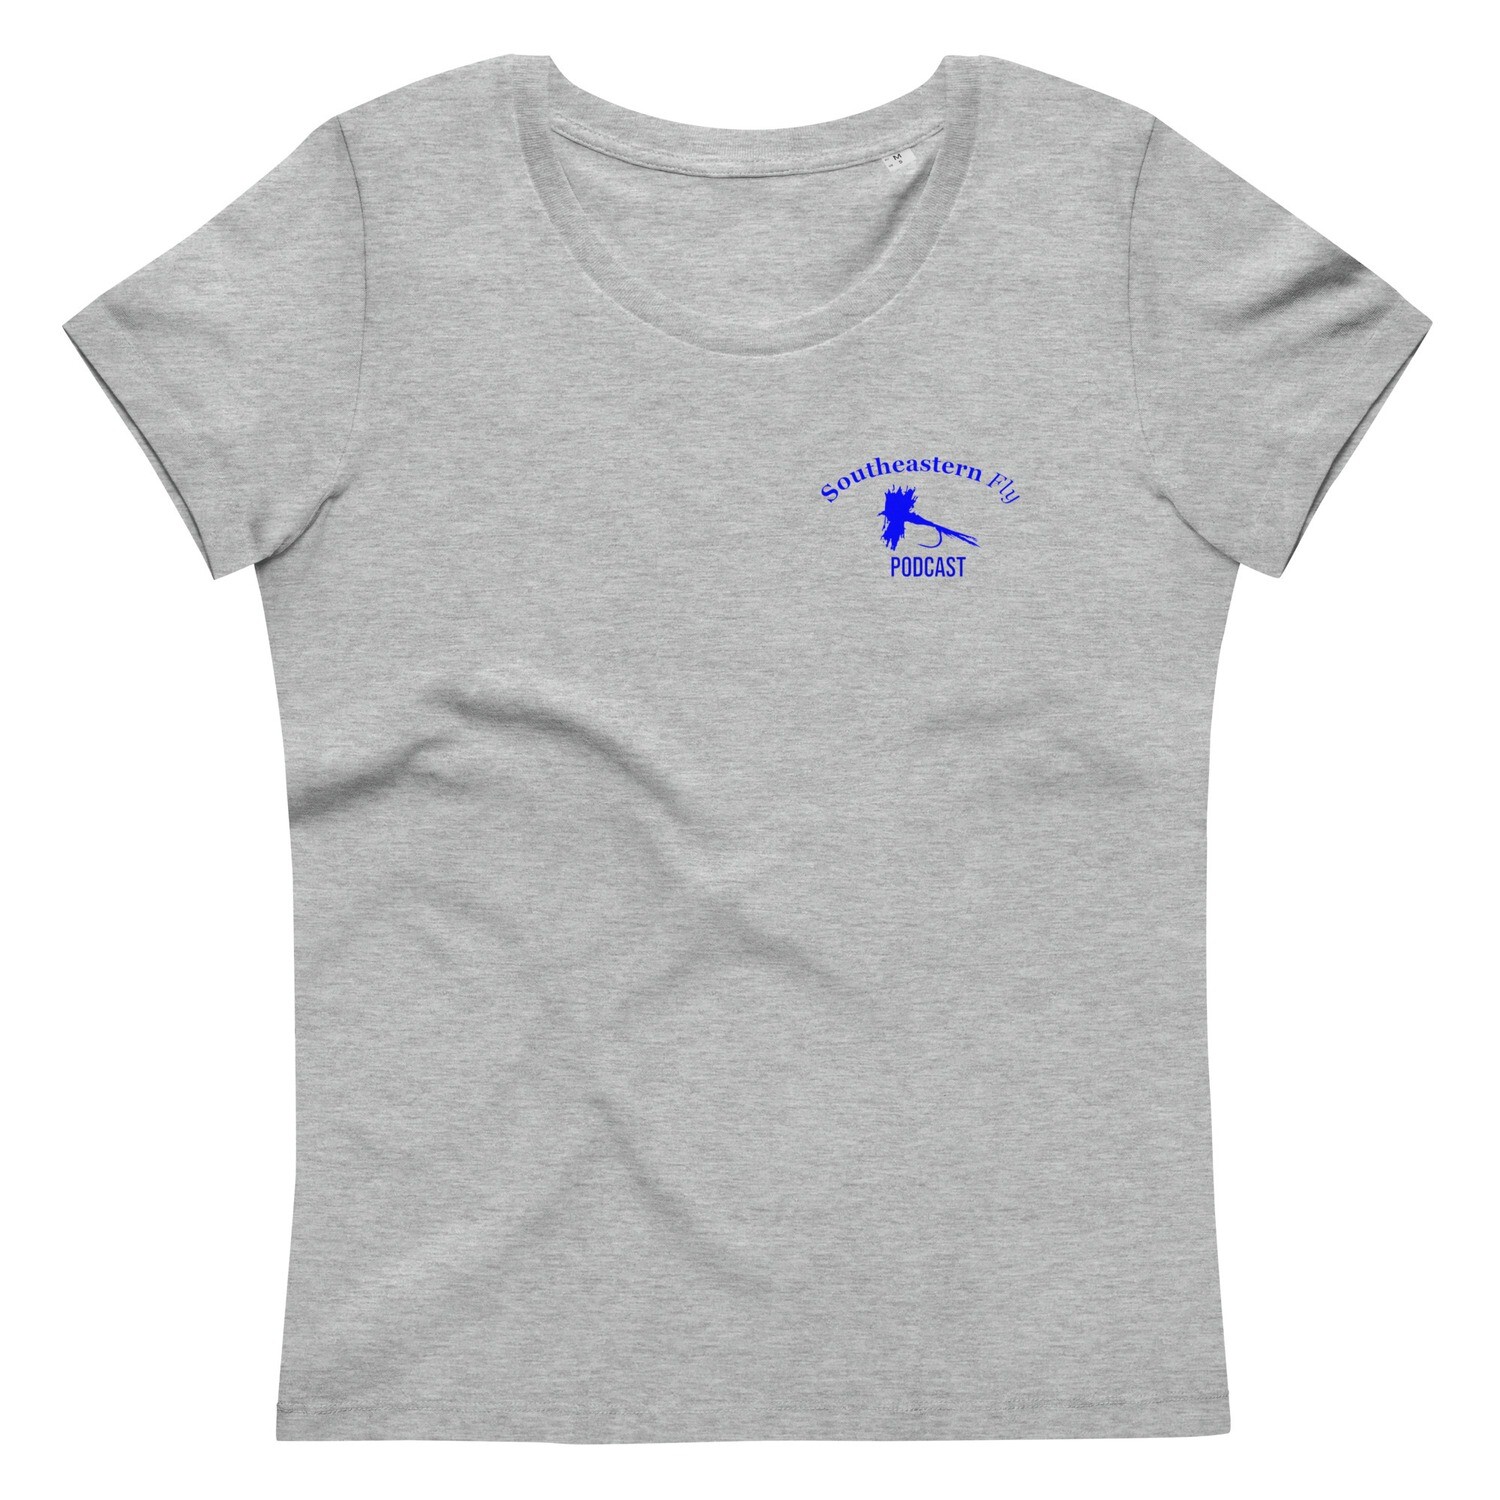 Women's Fitted Eco Tee